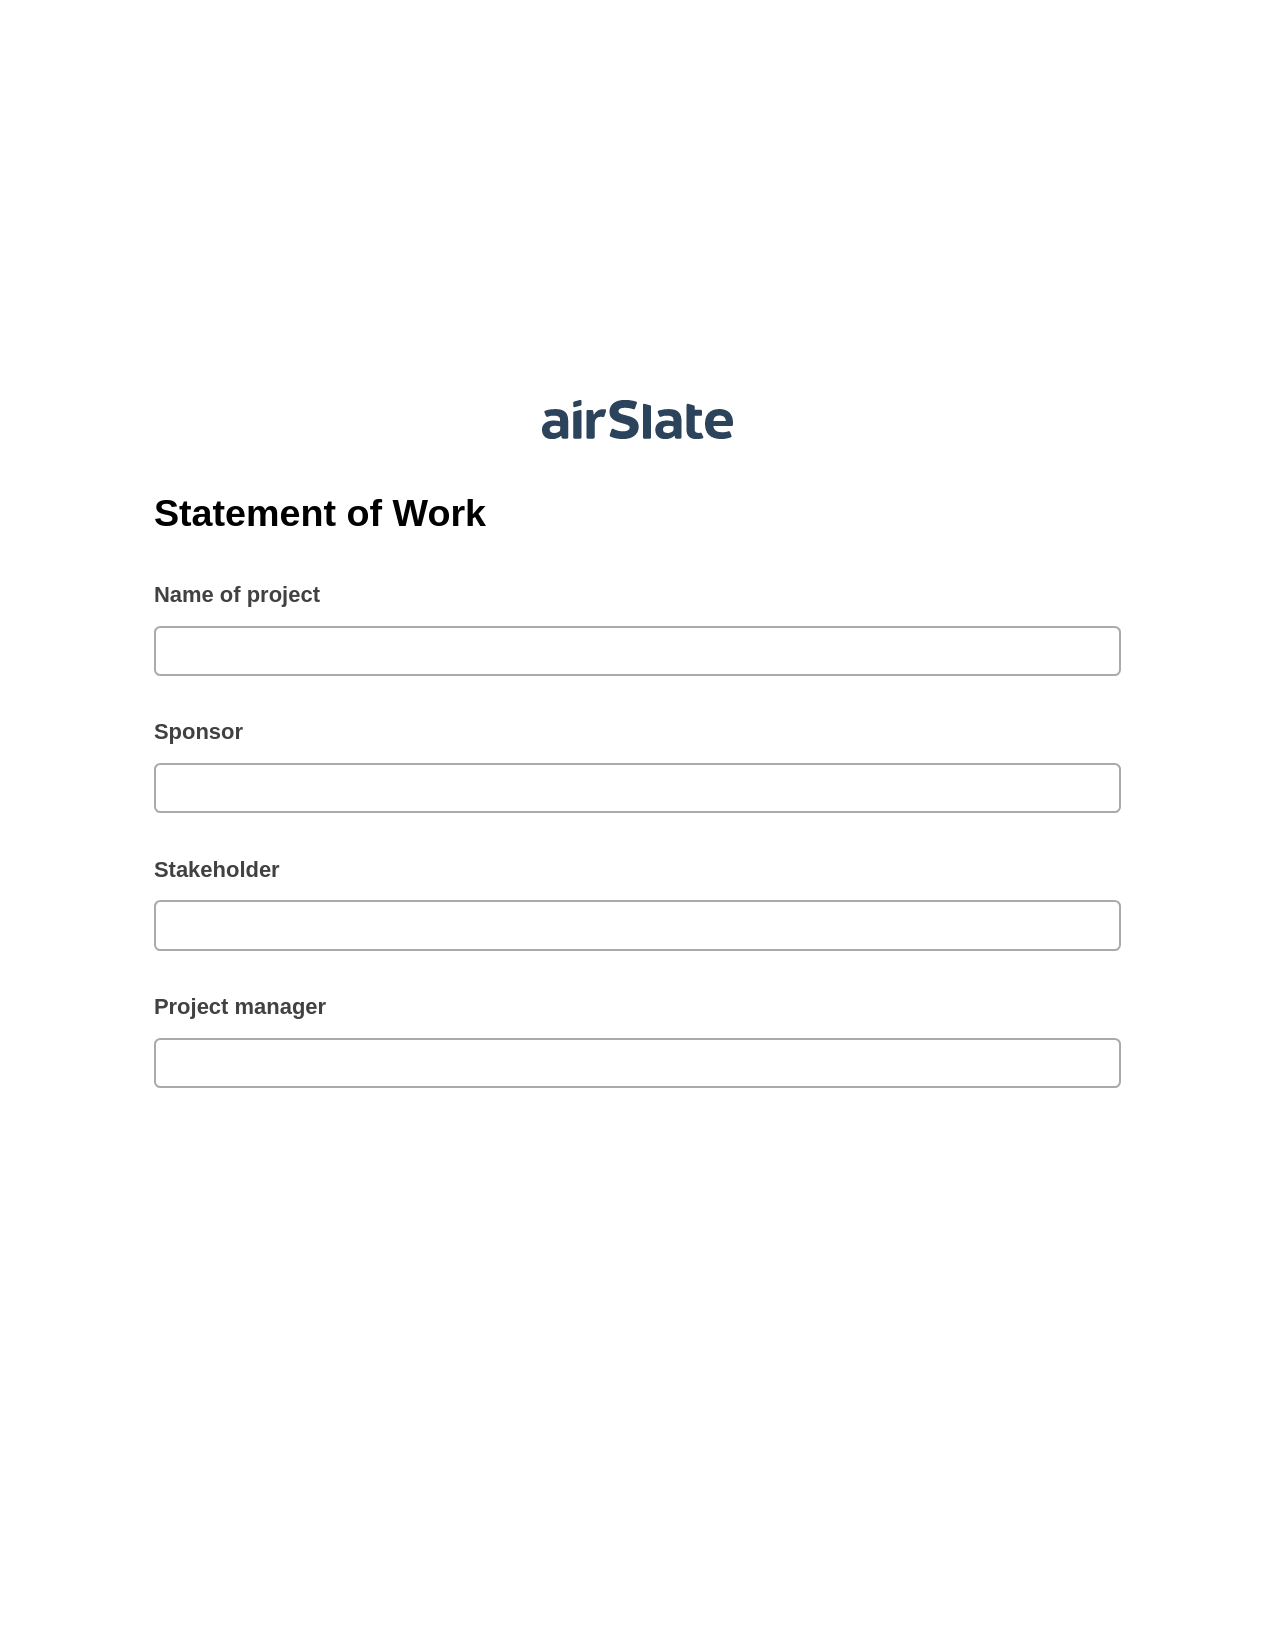 Multirole Statement of Work Pre-fill from Google Sheets Bot, Assign Slate Name Bot, Post-finish Document Bot